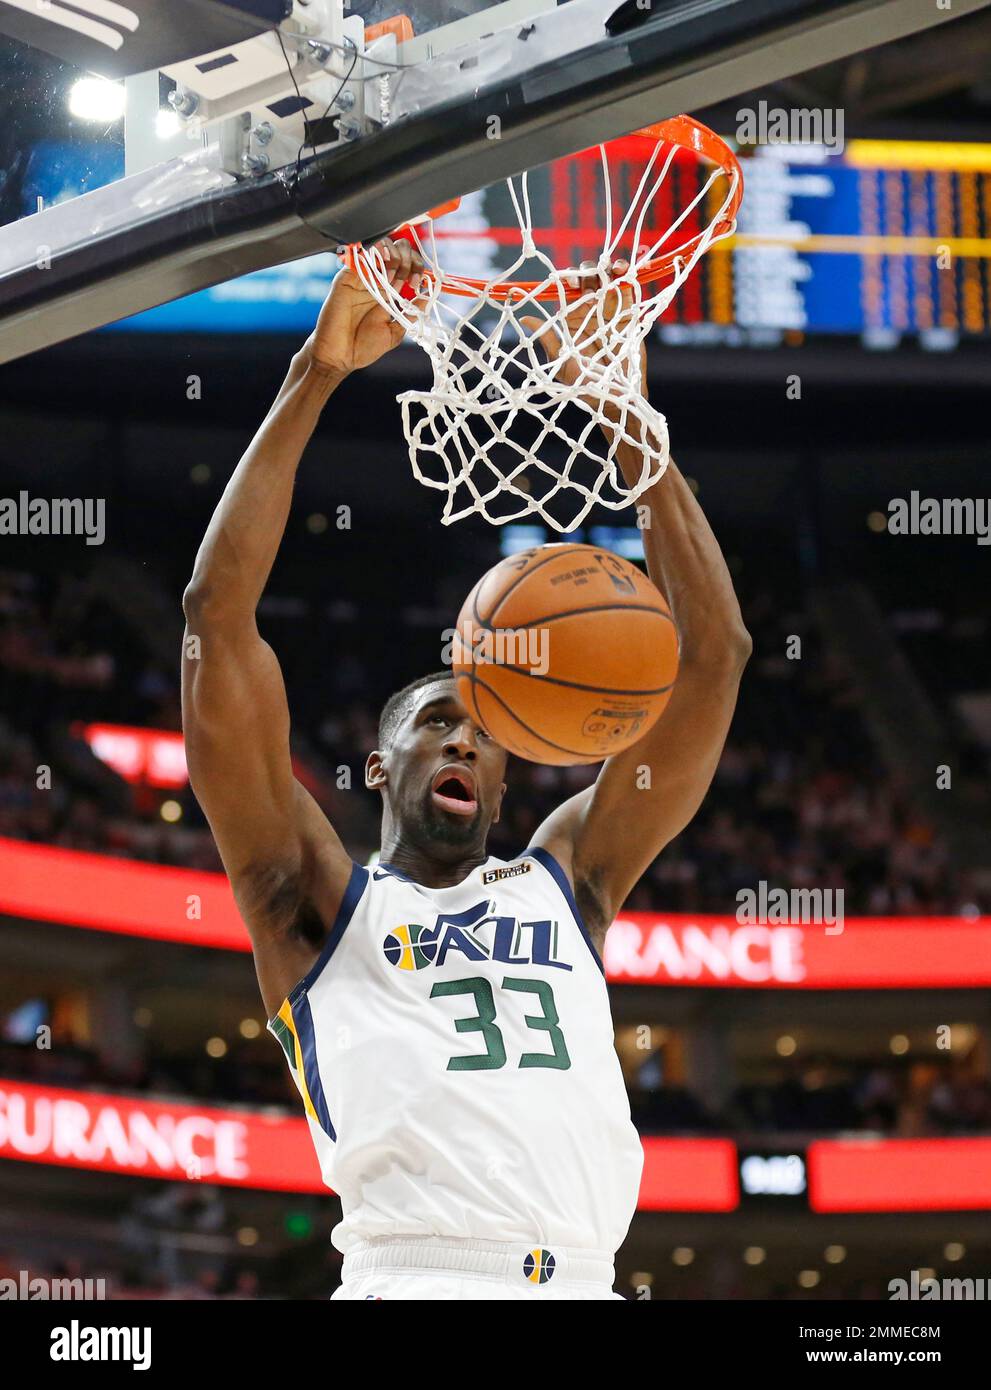 Utah Jazz center Ekpe Udoh (33) dunks the ball against the Perth Wildcats  in the second half during an NBA exhibition basketball game Saturday, Sept.  29, 2018, in Salt Lake City. (AP